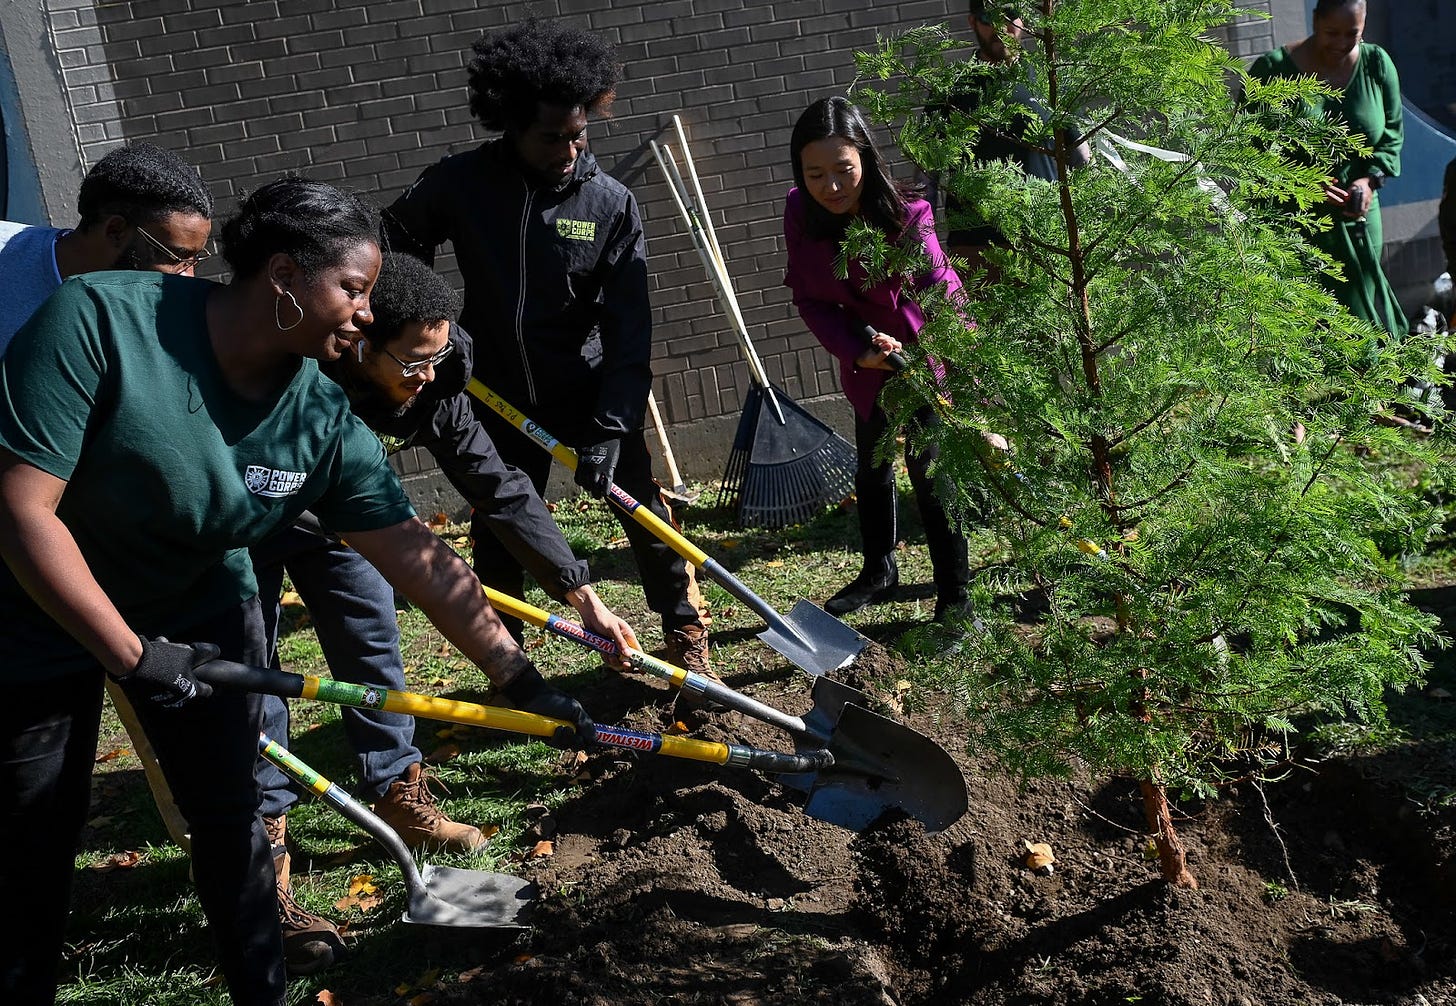 Michelle and PowerCorps Boston members use shovels to fill in the dirt around the Dawn Redwood sapling in front of a gray brick building